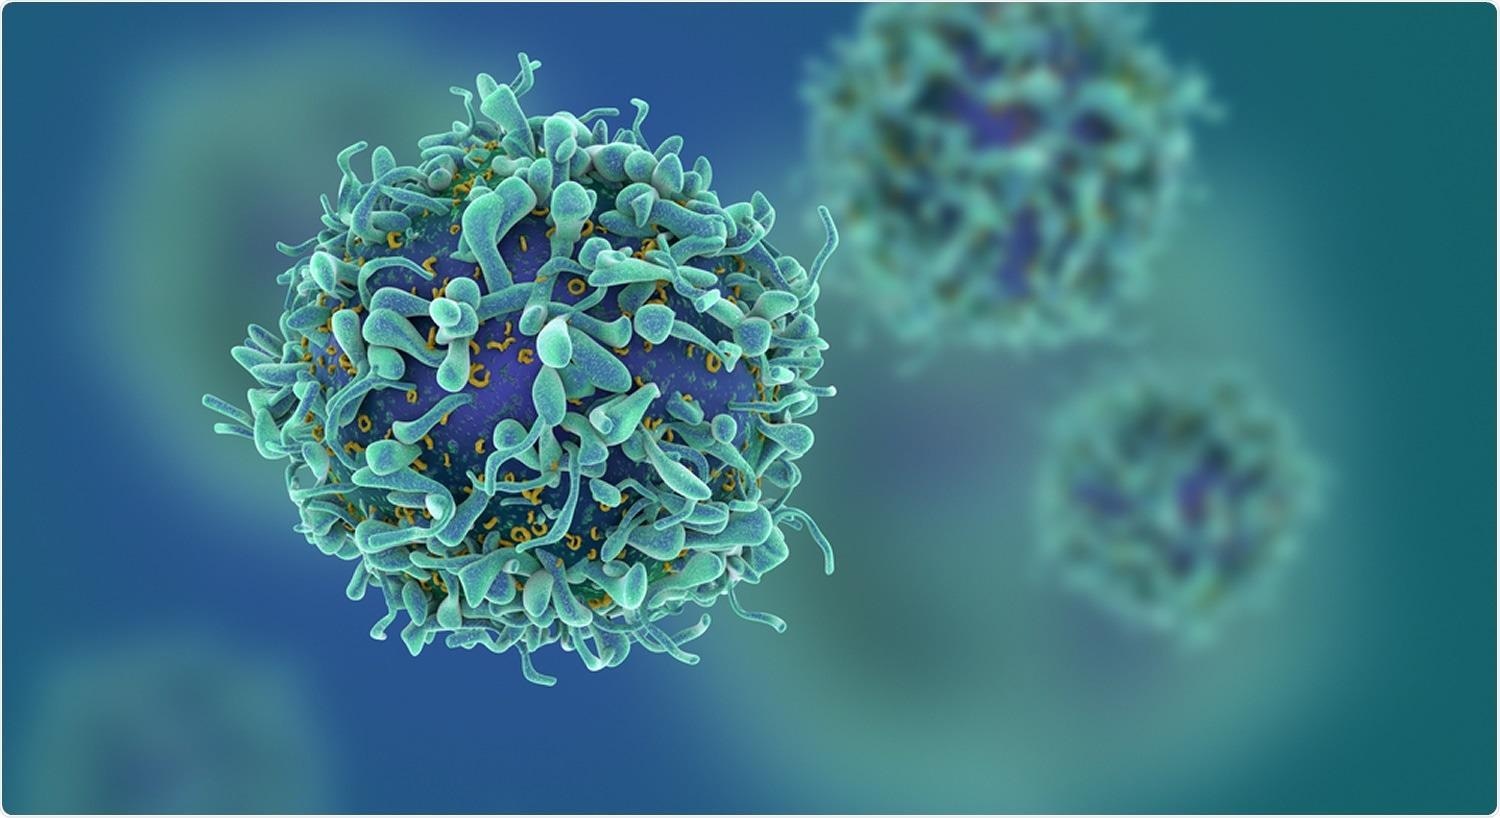 Study: SARS-CoV-2 spike T cell responses induced upon vaccination or infection remain robust against Omicron. Image Credit: Fusebulb / Shutterstock